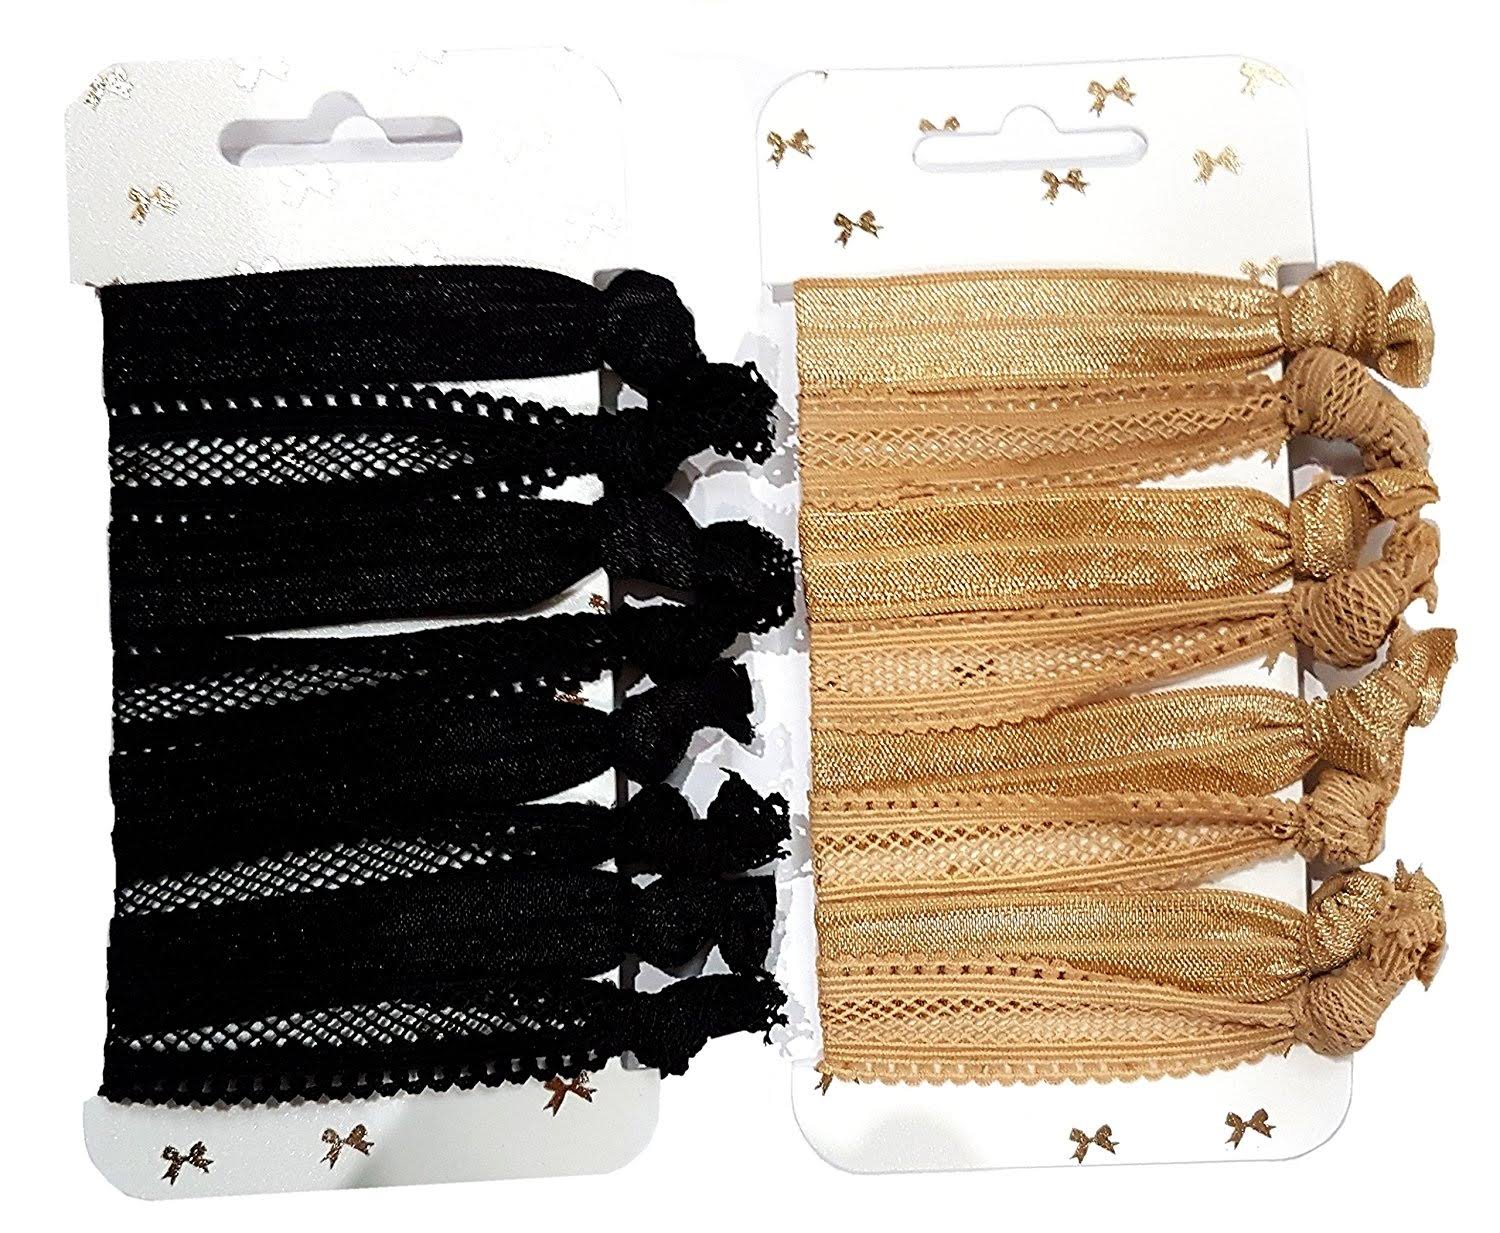 16 Blonde and Black No Snag Tied Ponytail Holders Elastic Hair Bands (2 Cards) | Haircare